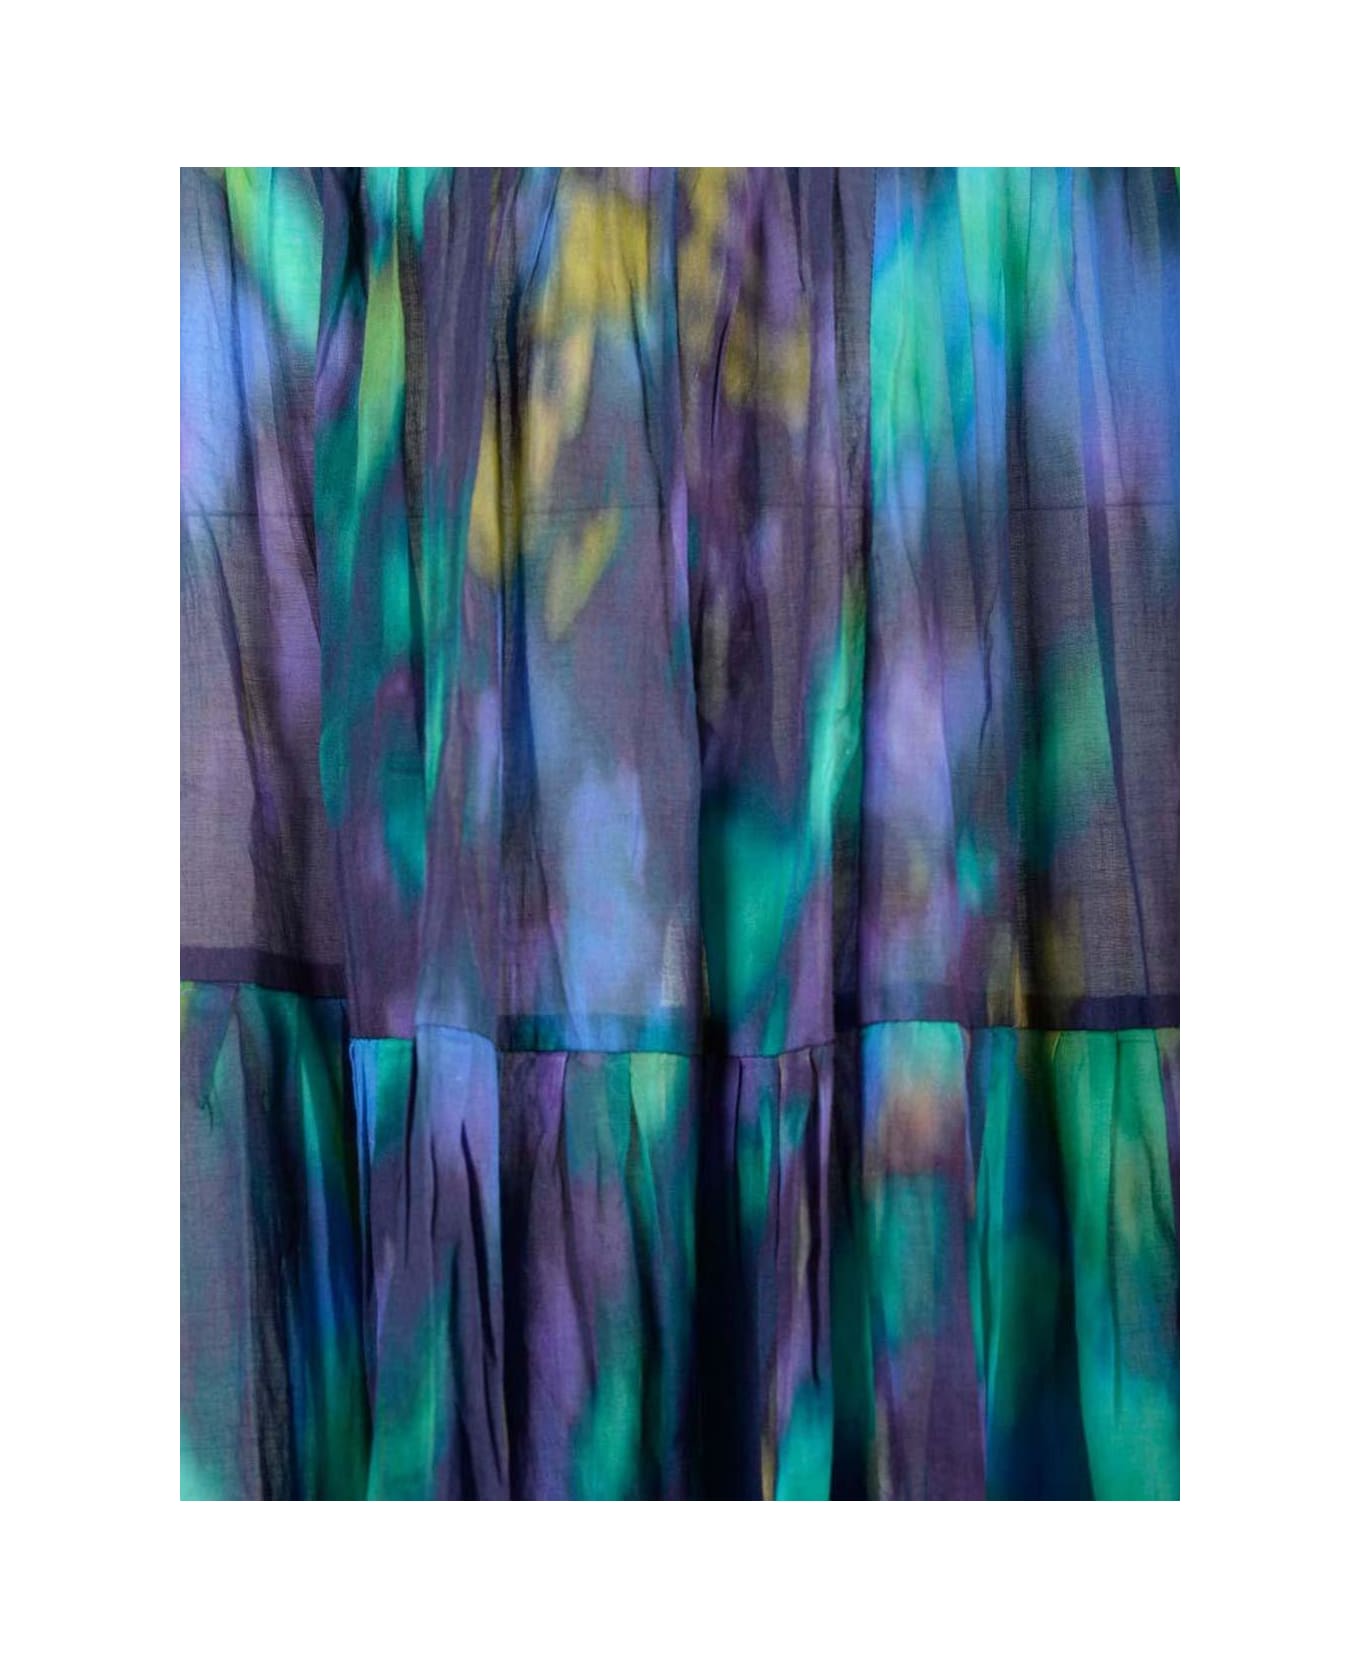 Isabel Marant Tie-dyed Printed Skirt - Blue/Green